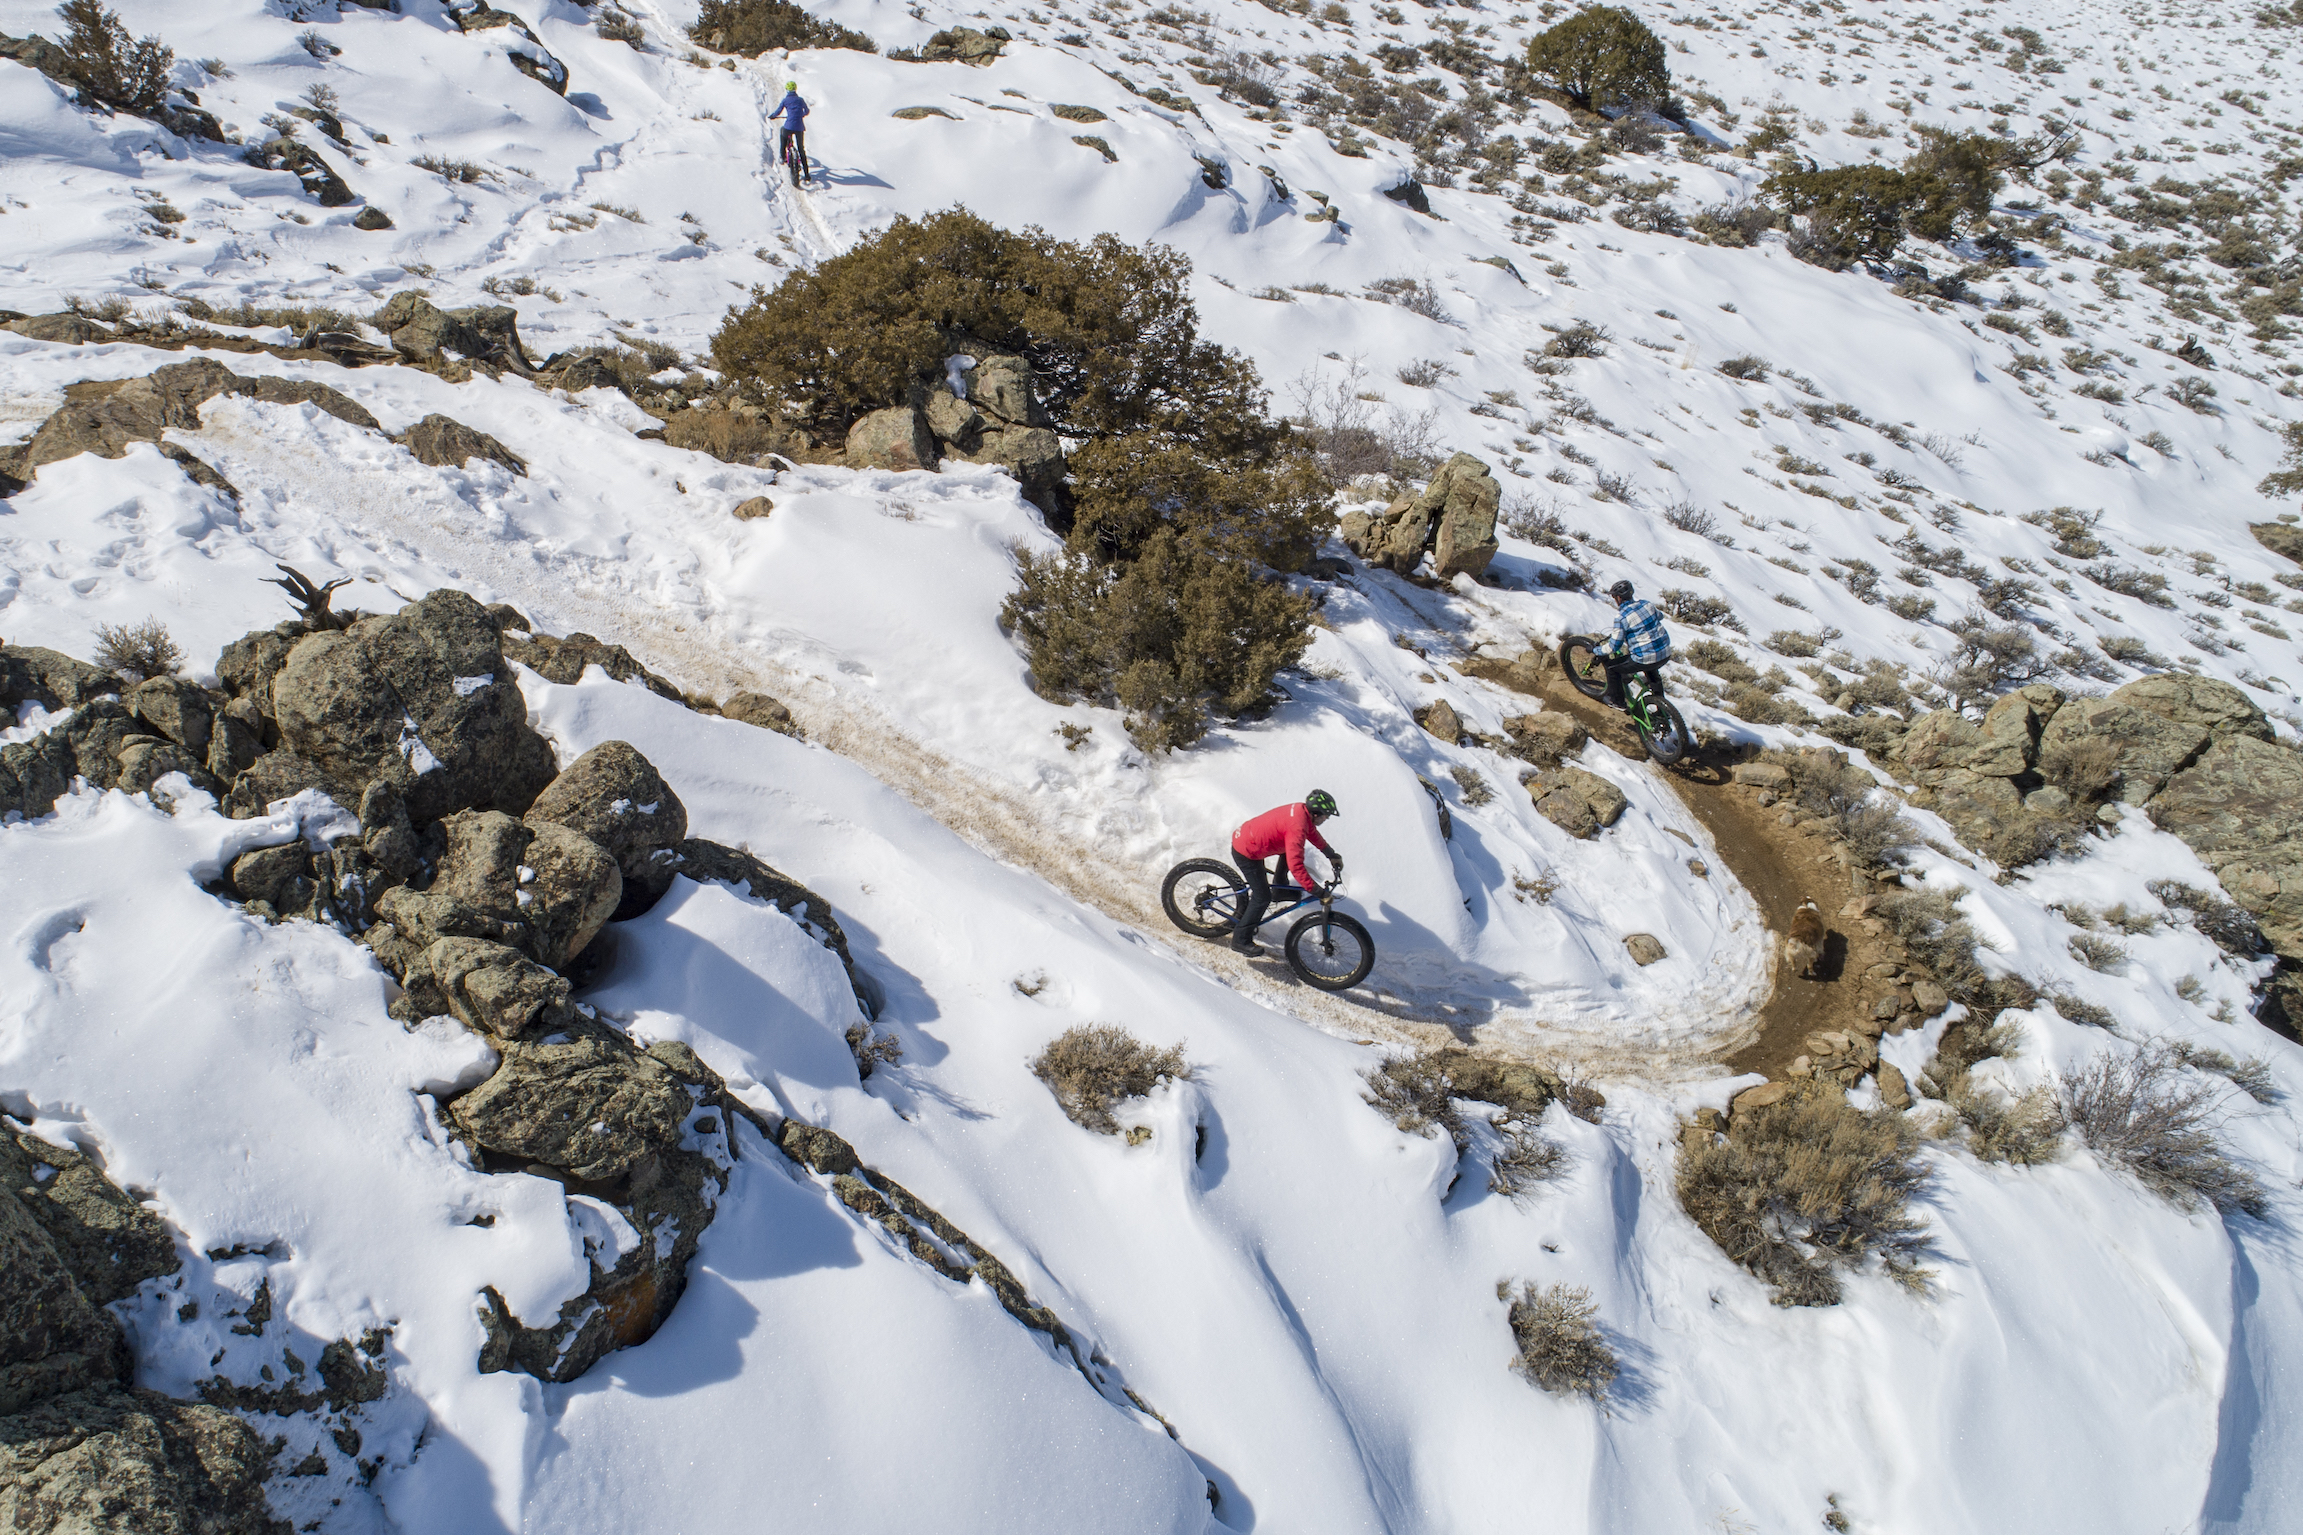 An aerial view of fat bikers riding on a snowy trail